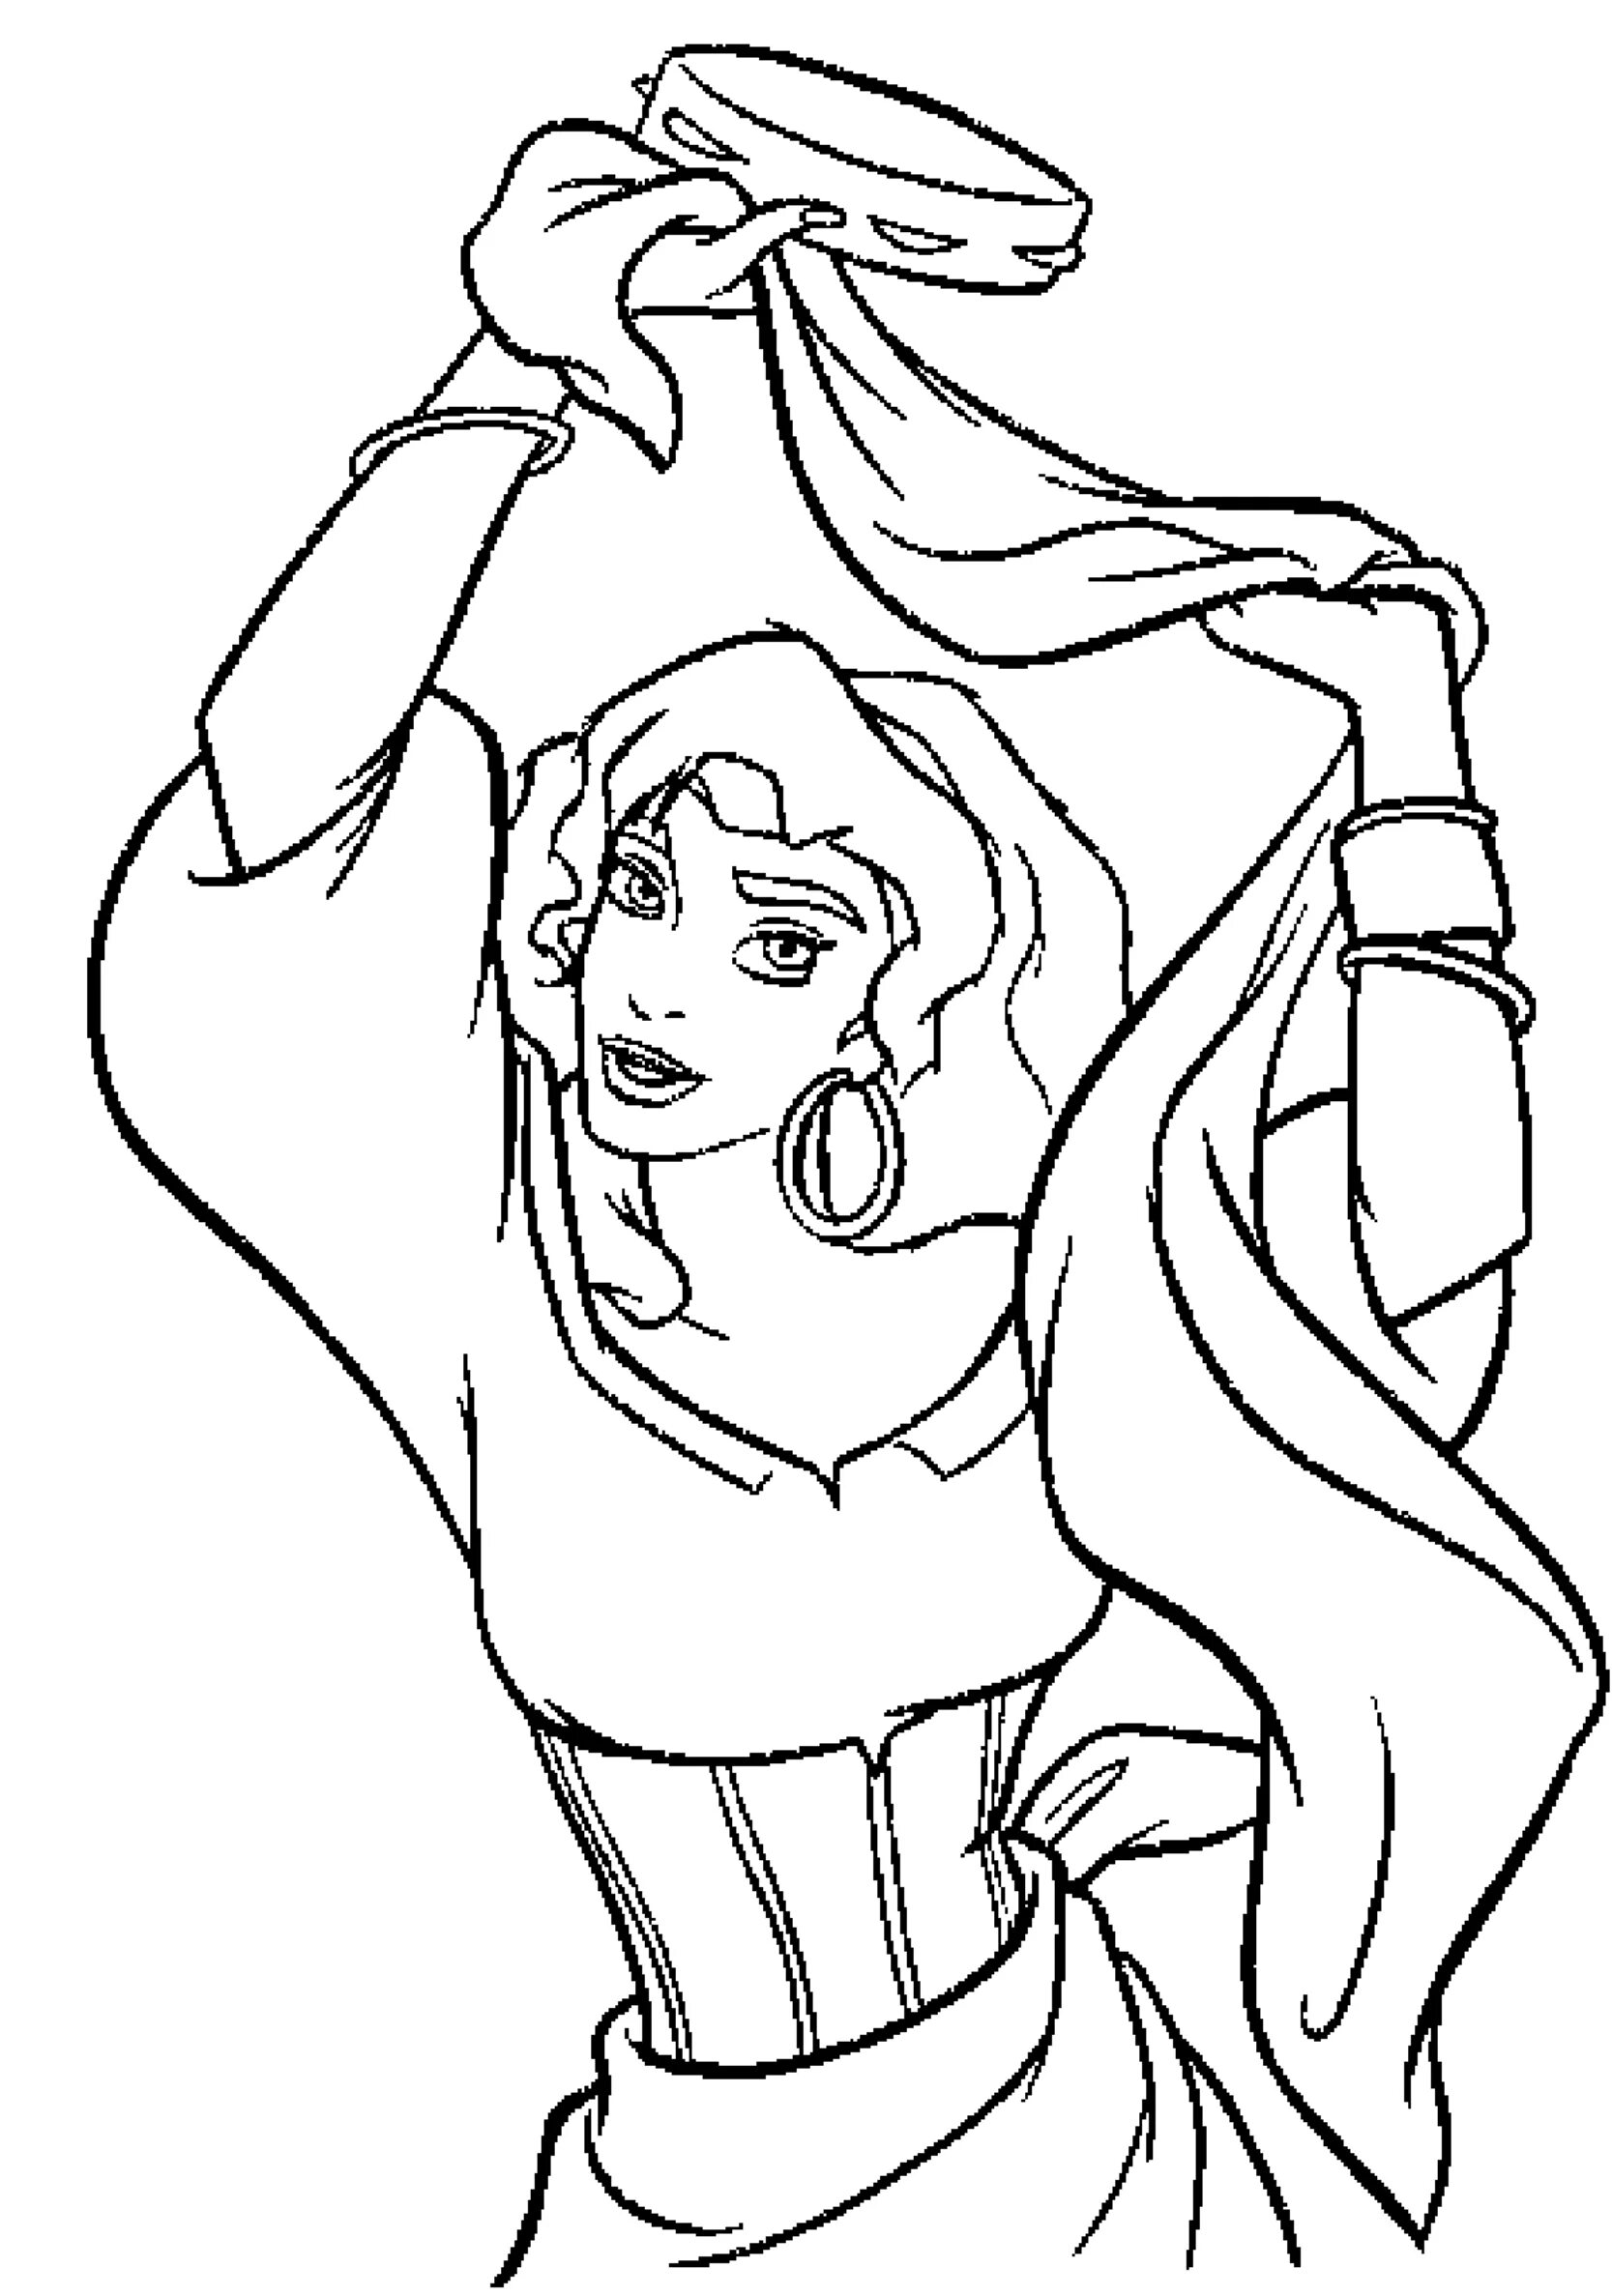 Coloring page glamorous gypsy